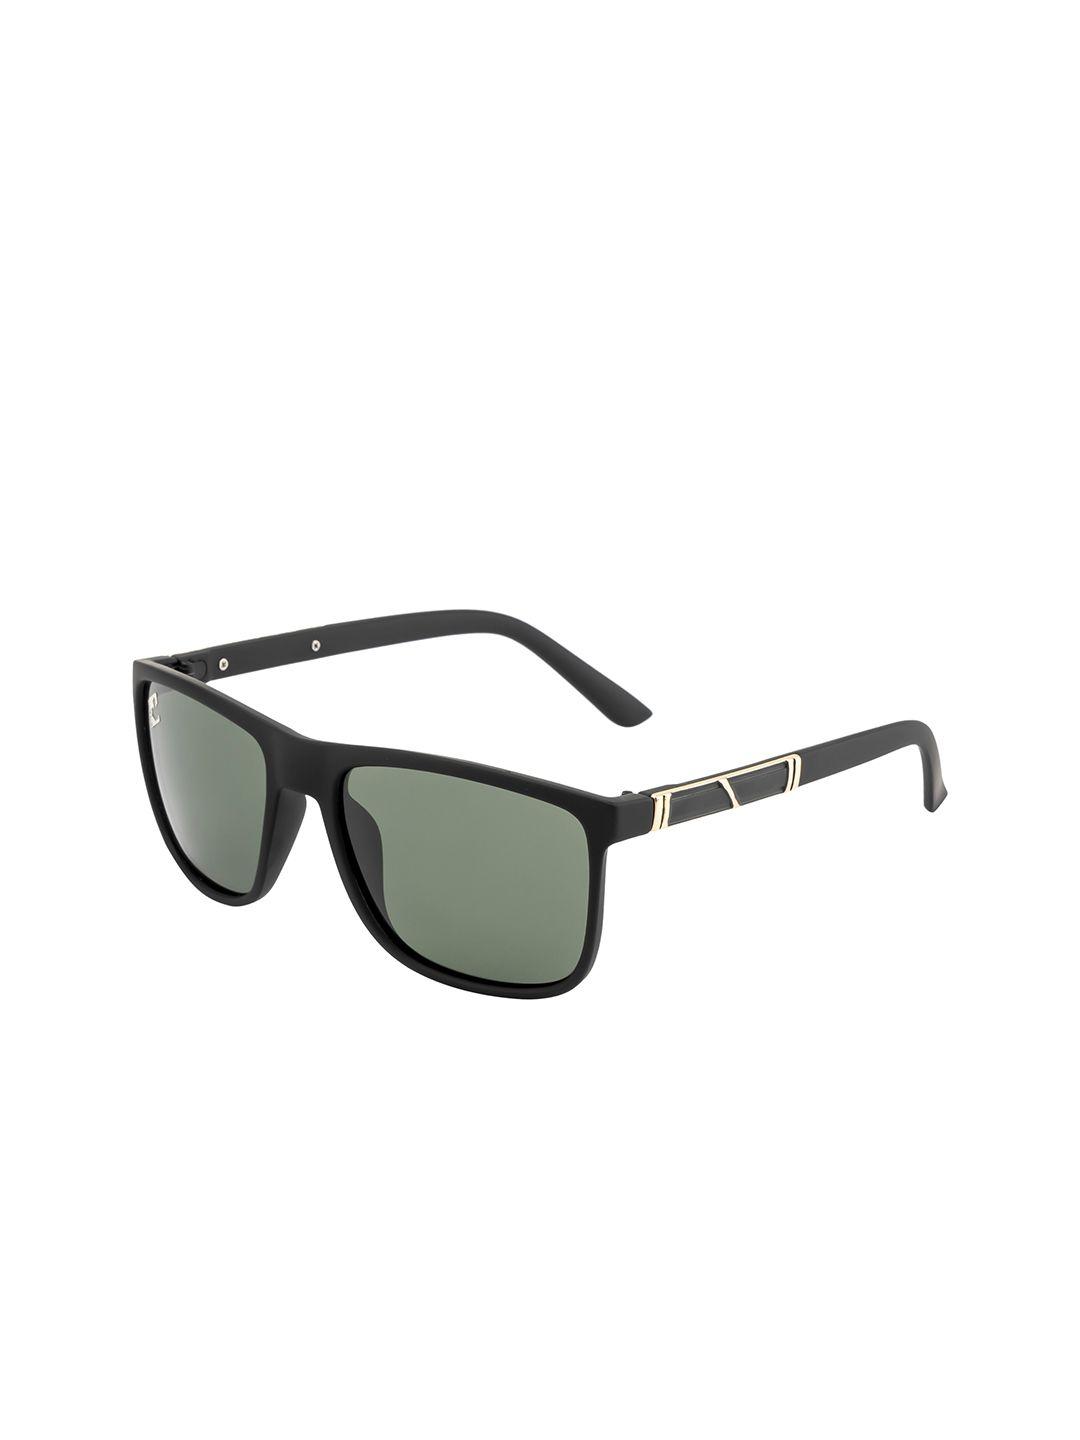 clark n palmer unisex green lens & black square sunglasses with polarised and uv protected lens